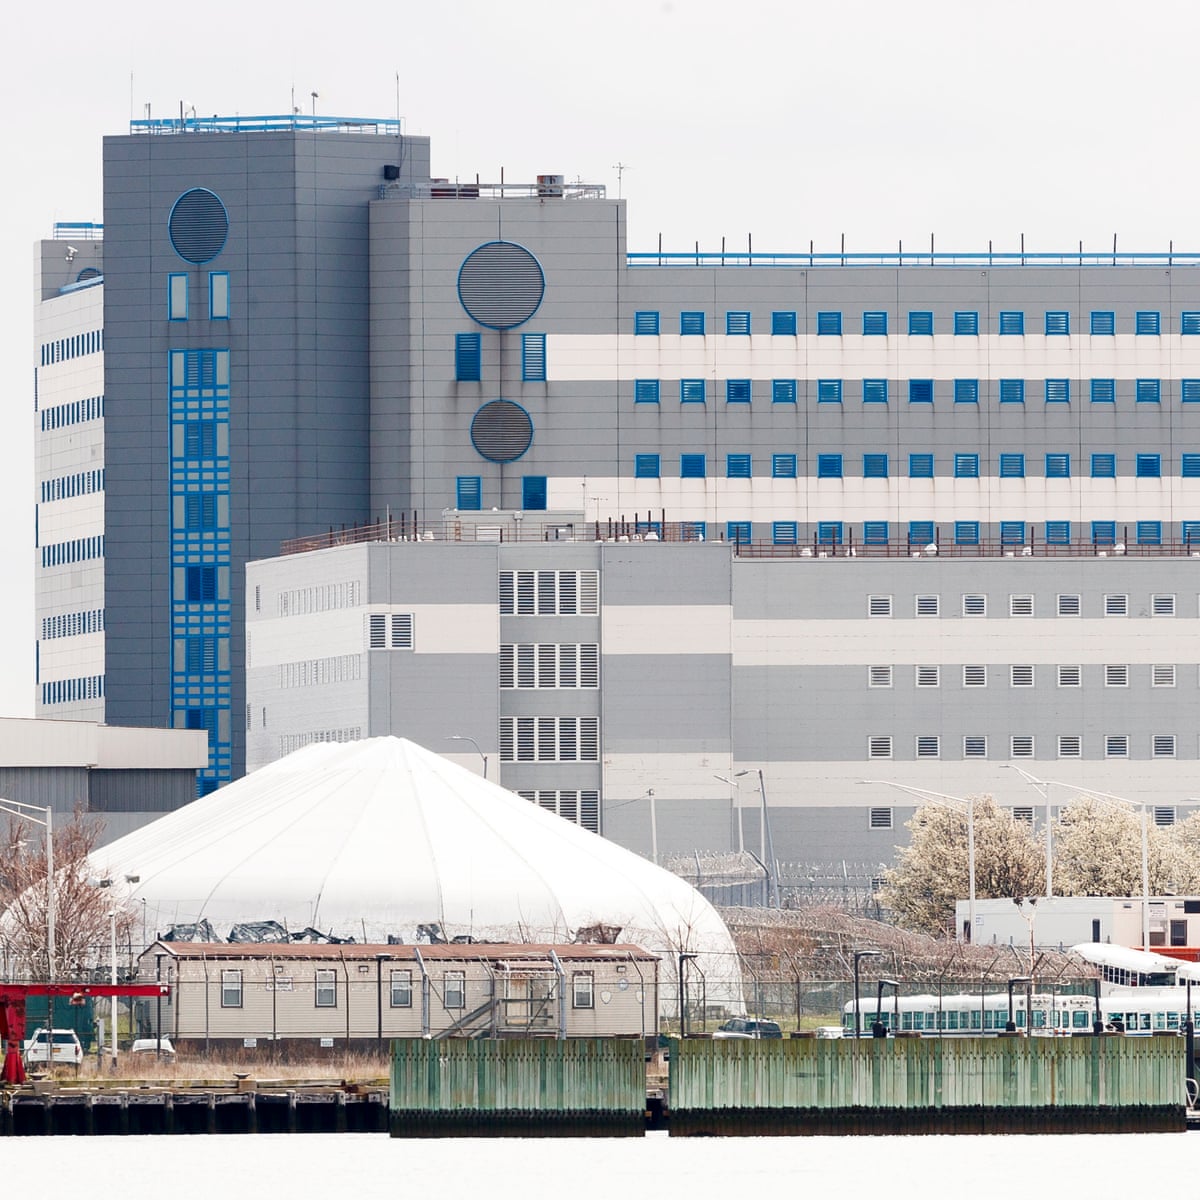 Coronavirus Spread At Rikers Is A Public Health Disaster Says